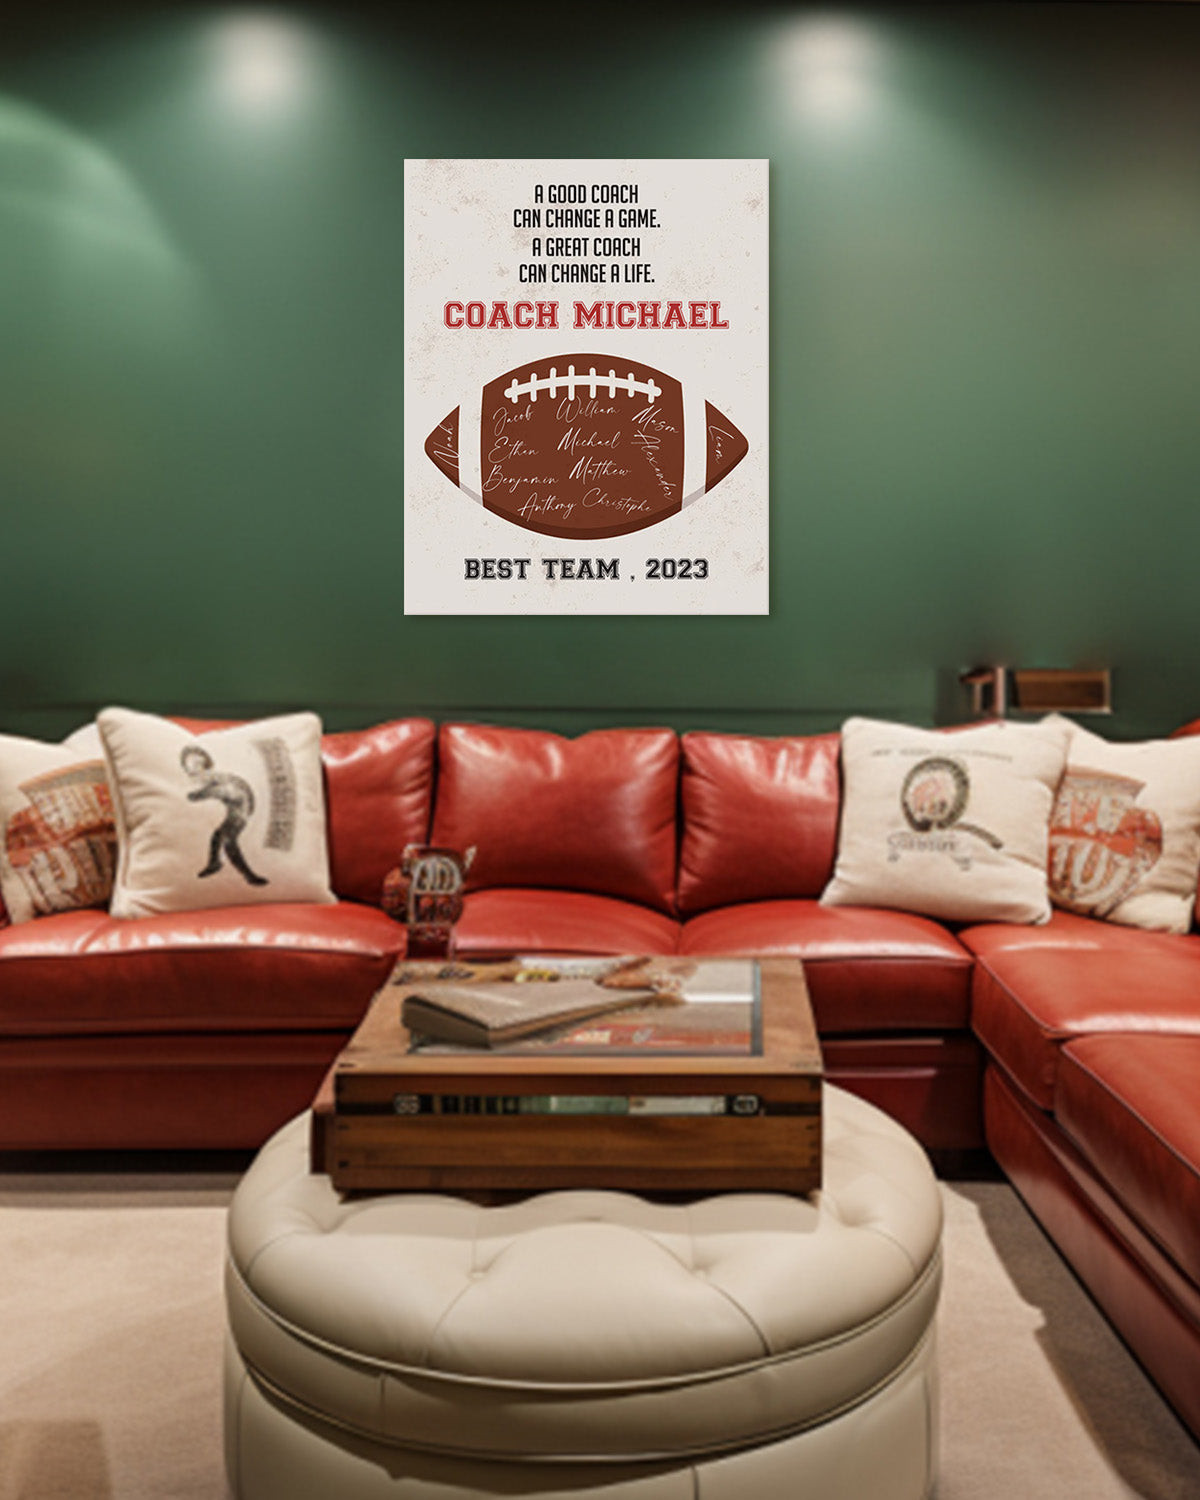 Football Coach Appreciation Gift - Customize Athlete Names, Coach's Names, Team Name, Year or Season - Motivational Sports Wall Art - Coach's Quote